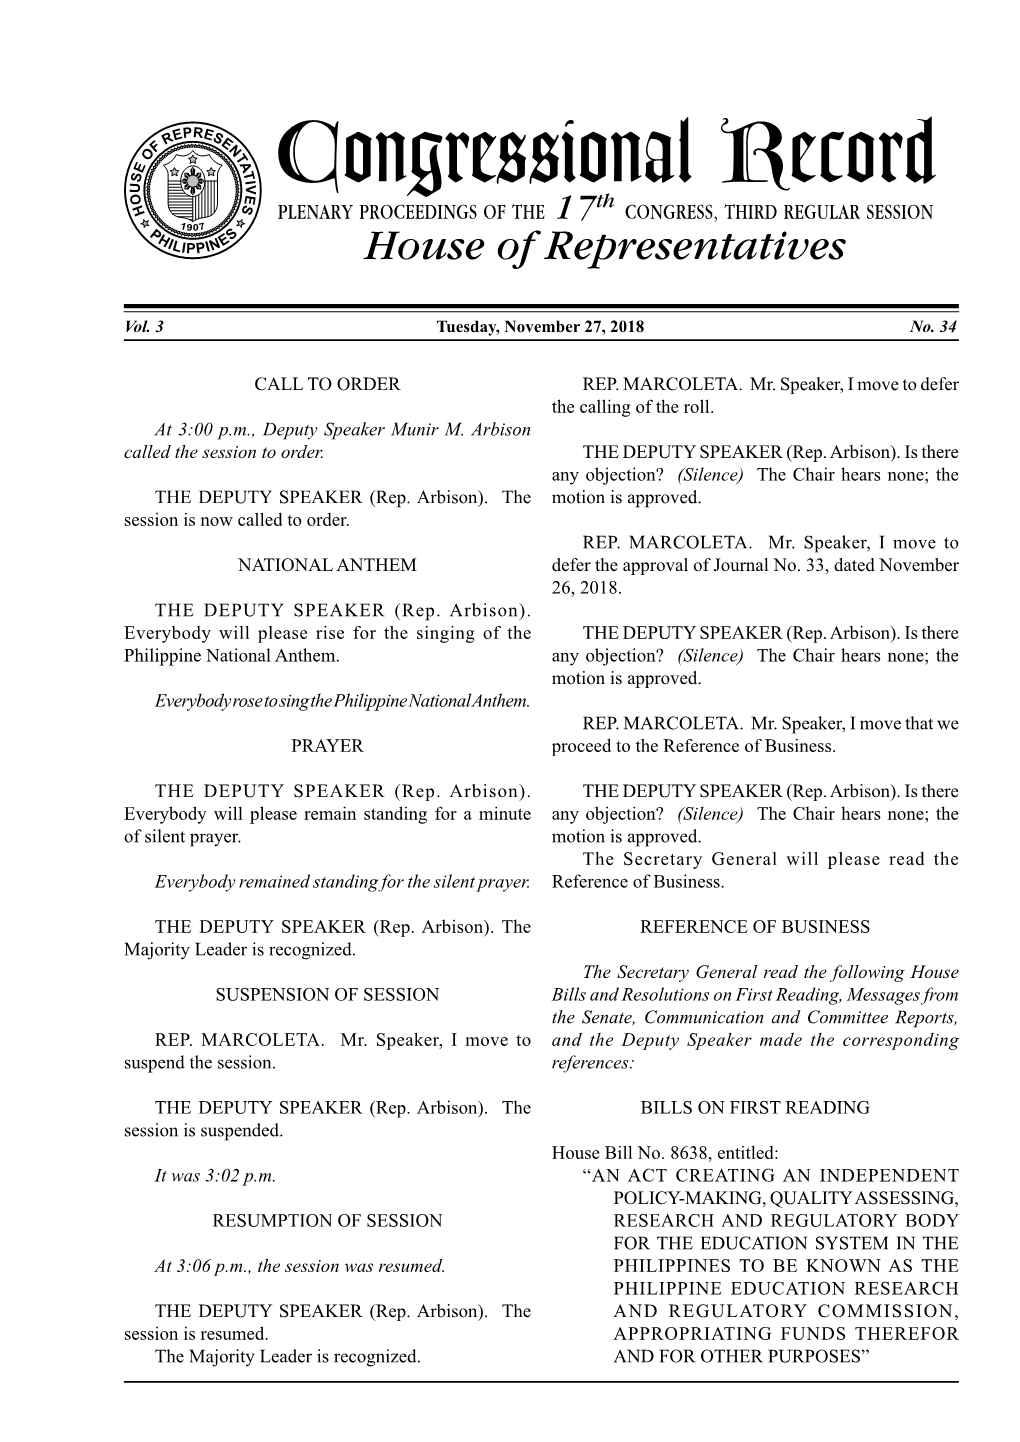 Congressional Record O H Th PLENARY PROCEEDINGS of the 17 CONGRESS, THIRD REGULAR SESSION 1 P 907 H S ILIPPINE House of Representatives